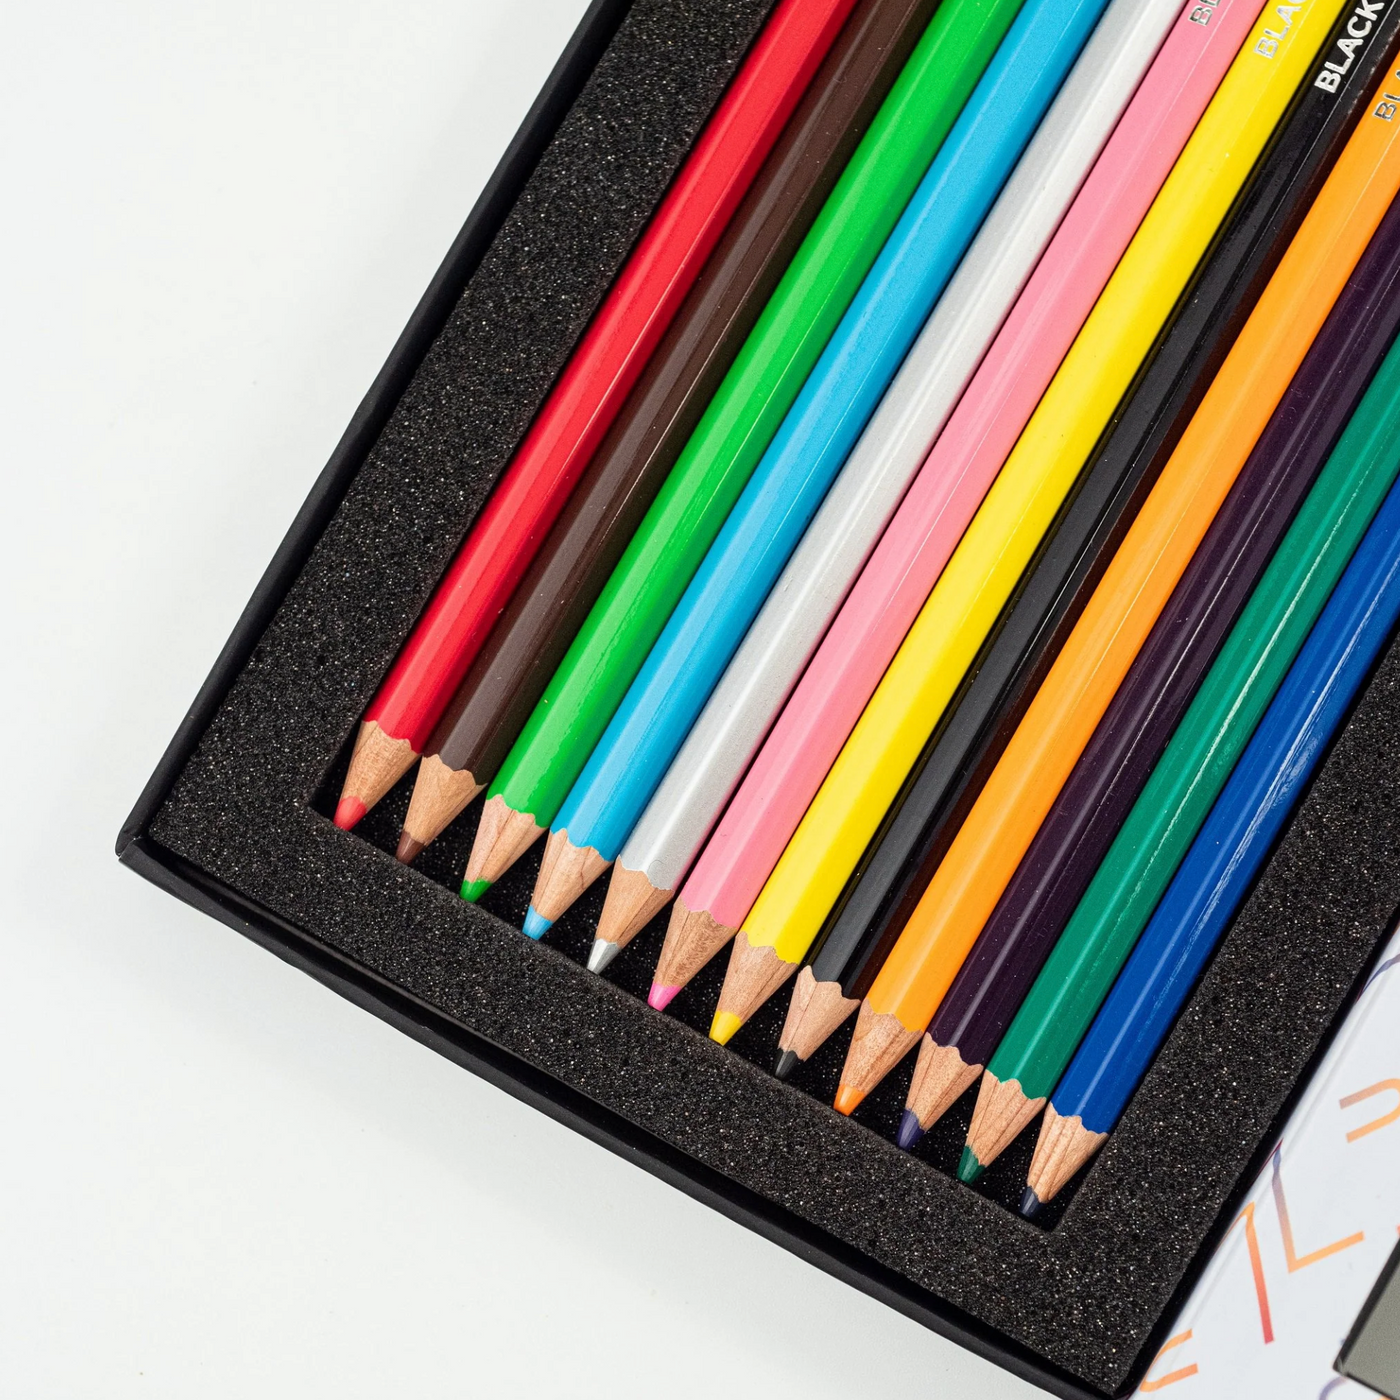 Blackwing Colors were designed specifically for coloring. Each pencil is made with Genuine Incense-cedar and includes a unique soft and smooth Japanese wax color core. Each pencil also features the same semi-hexagonal barrel found in our graphite pencils and a metal end cap that adds a bit of weight, giving the pencils a comfortable, balanced feel.  Details: Set of 12 Pencils  By Blackwing